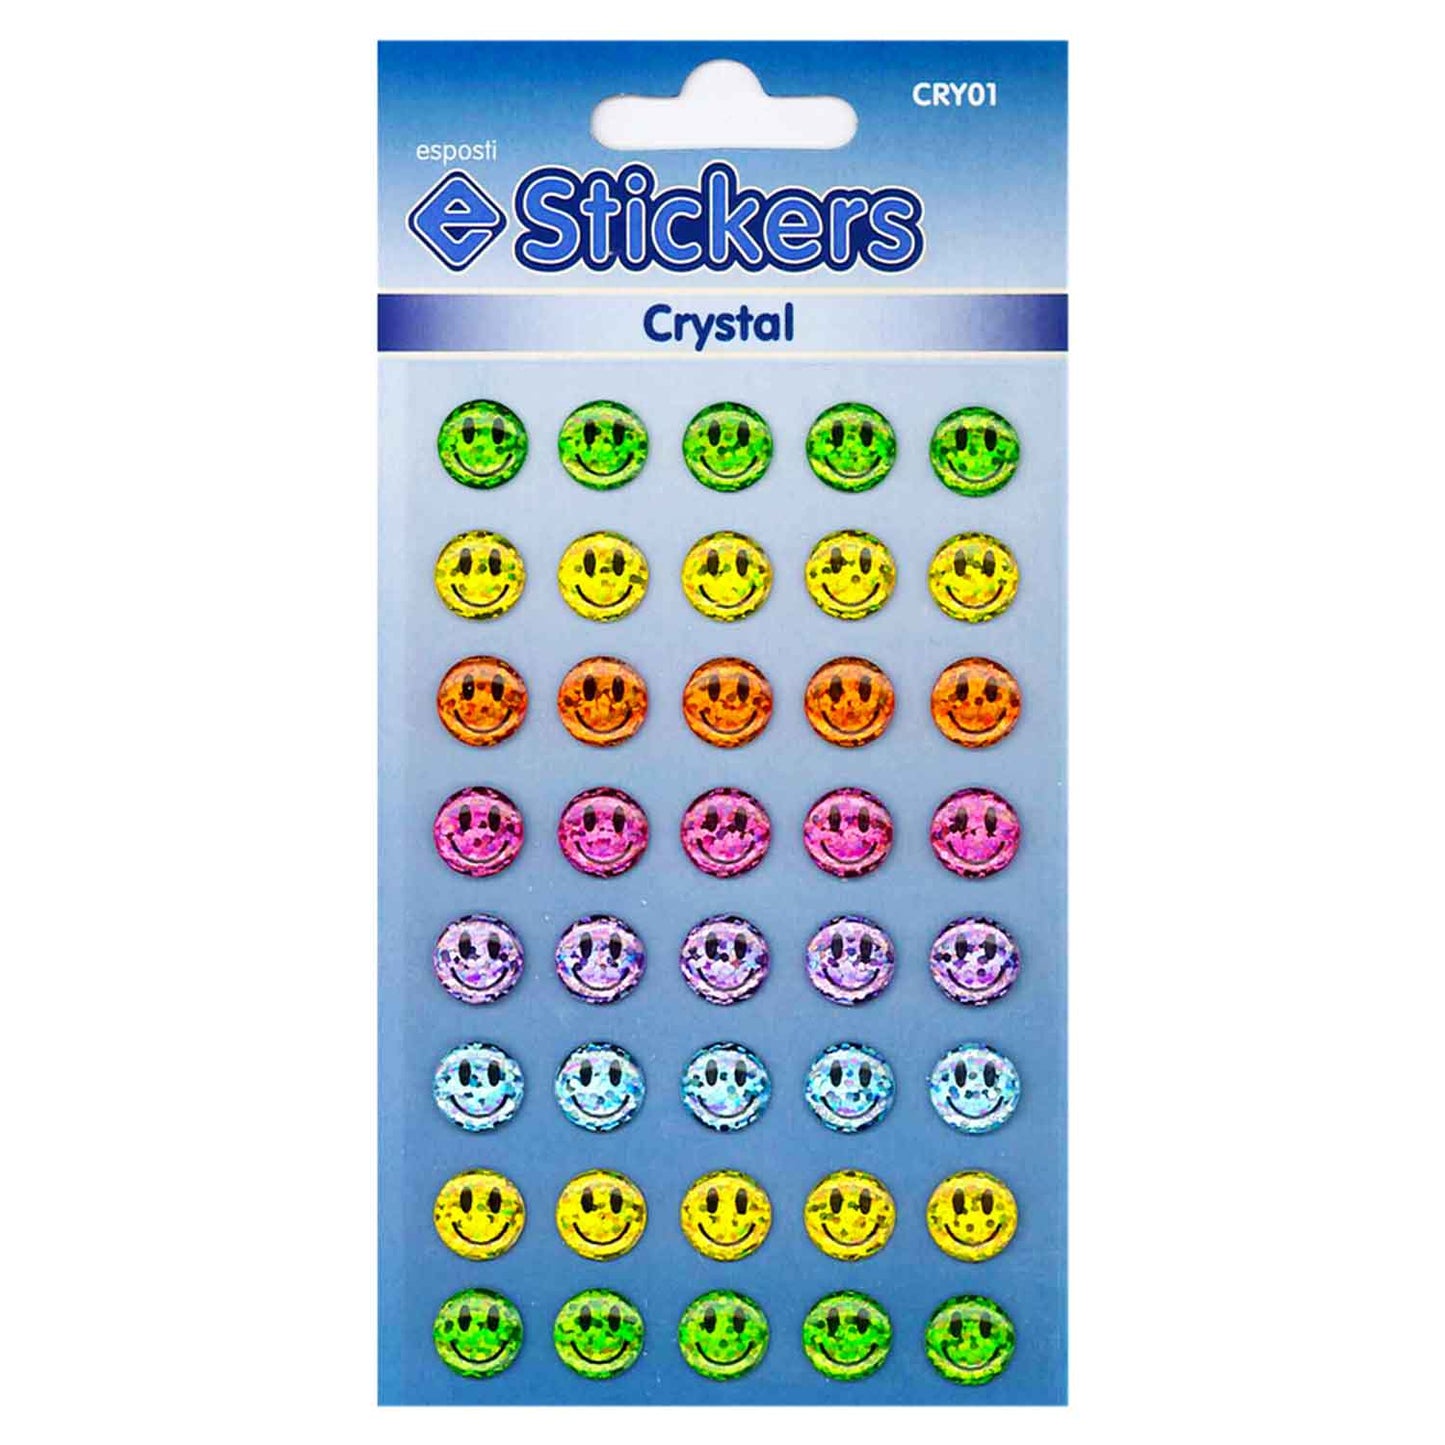 Crystal Smileys Stickers - CRY01